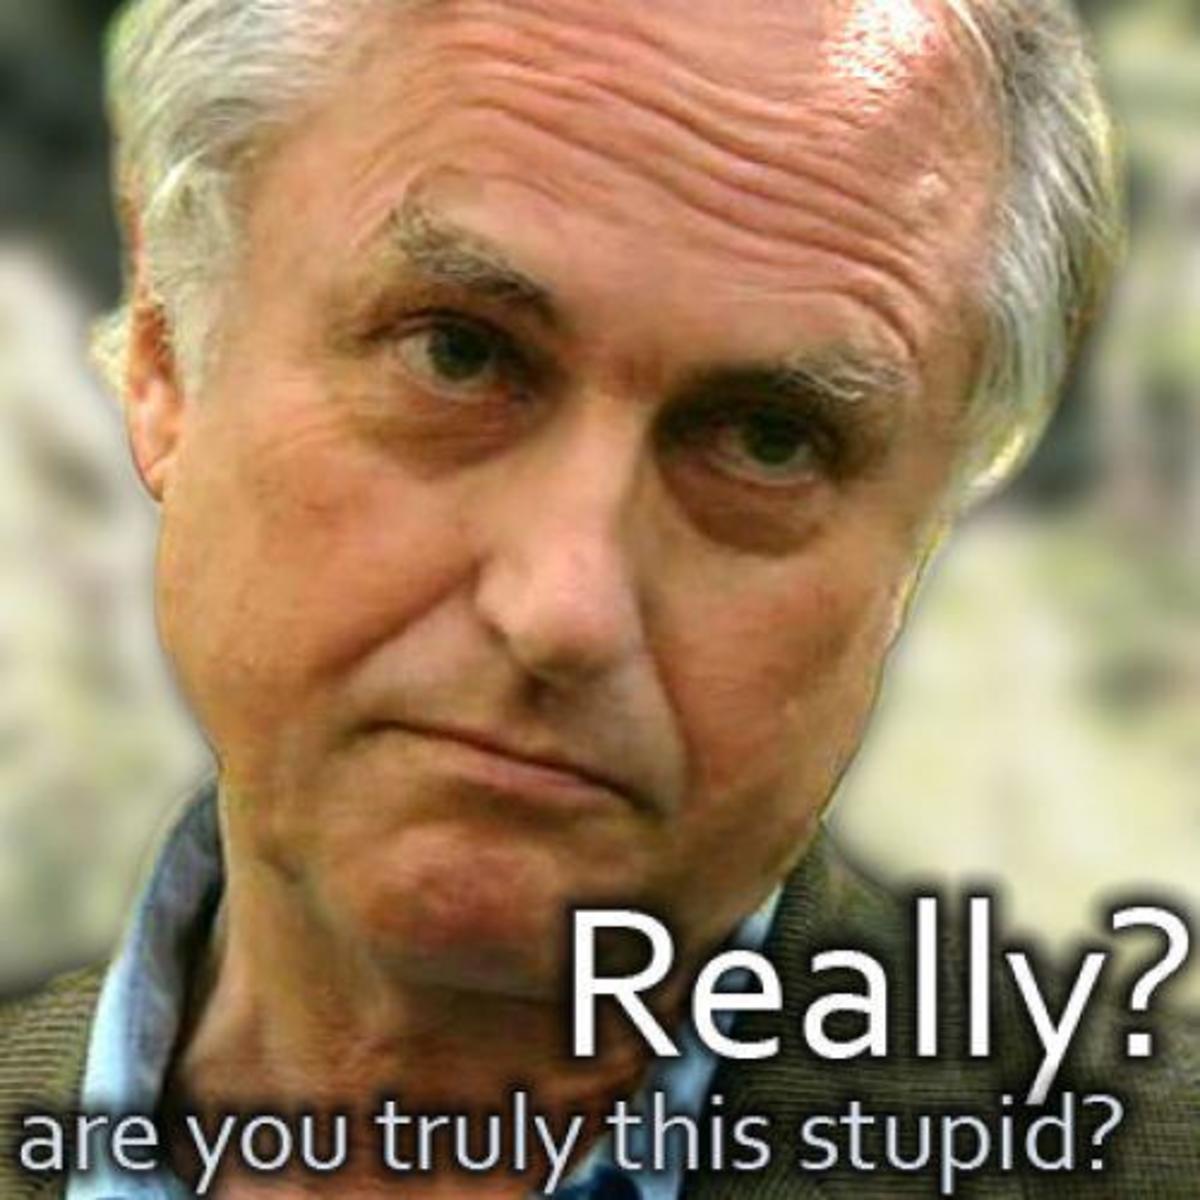 As evidenced by this image, Richard Dawkins is commonly perceived to be intelligent.